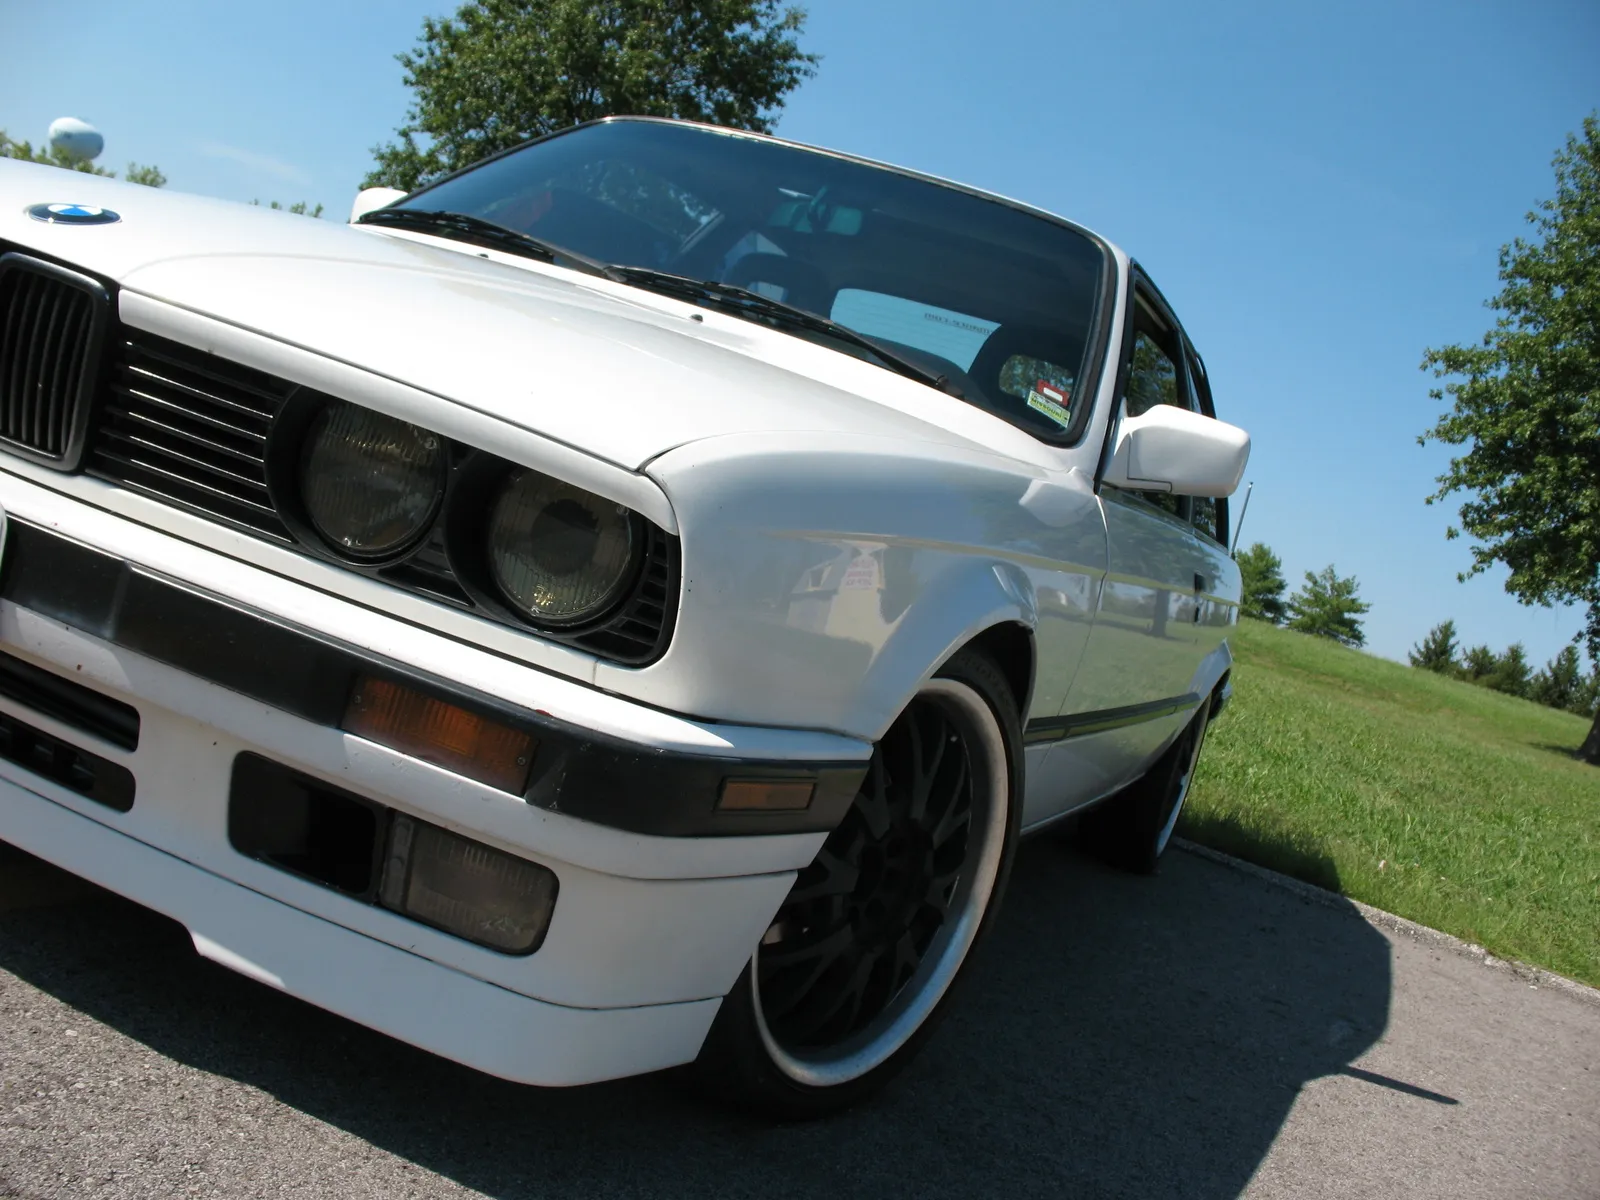 BMW 3 series 325is 1988 photo - 4